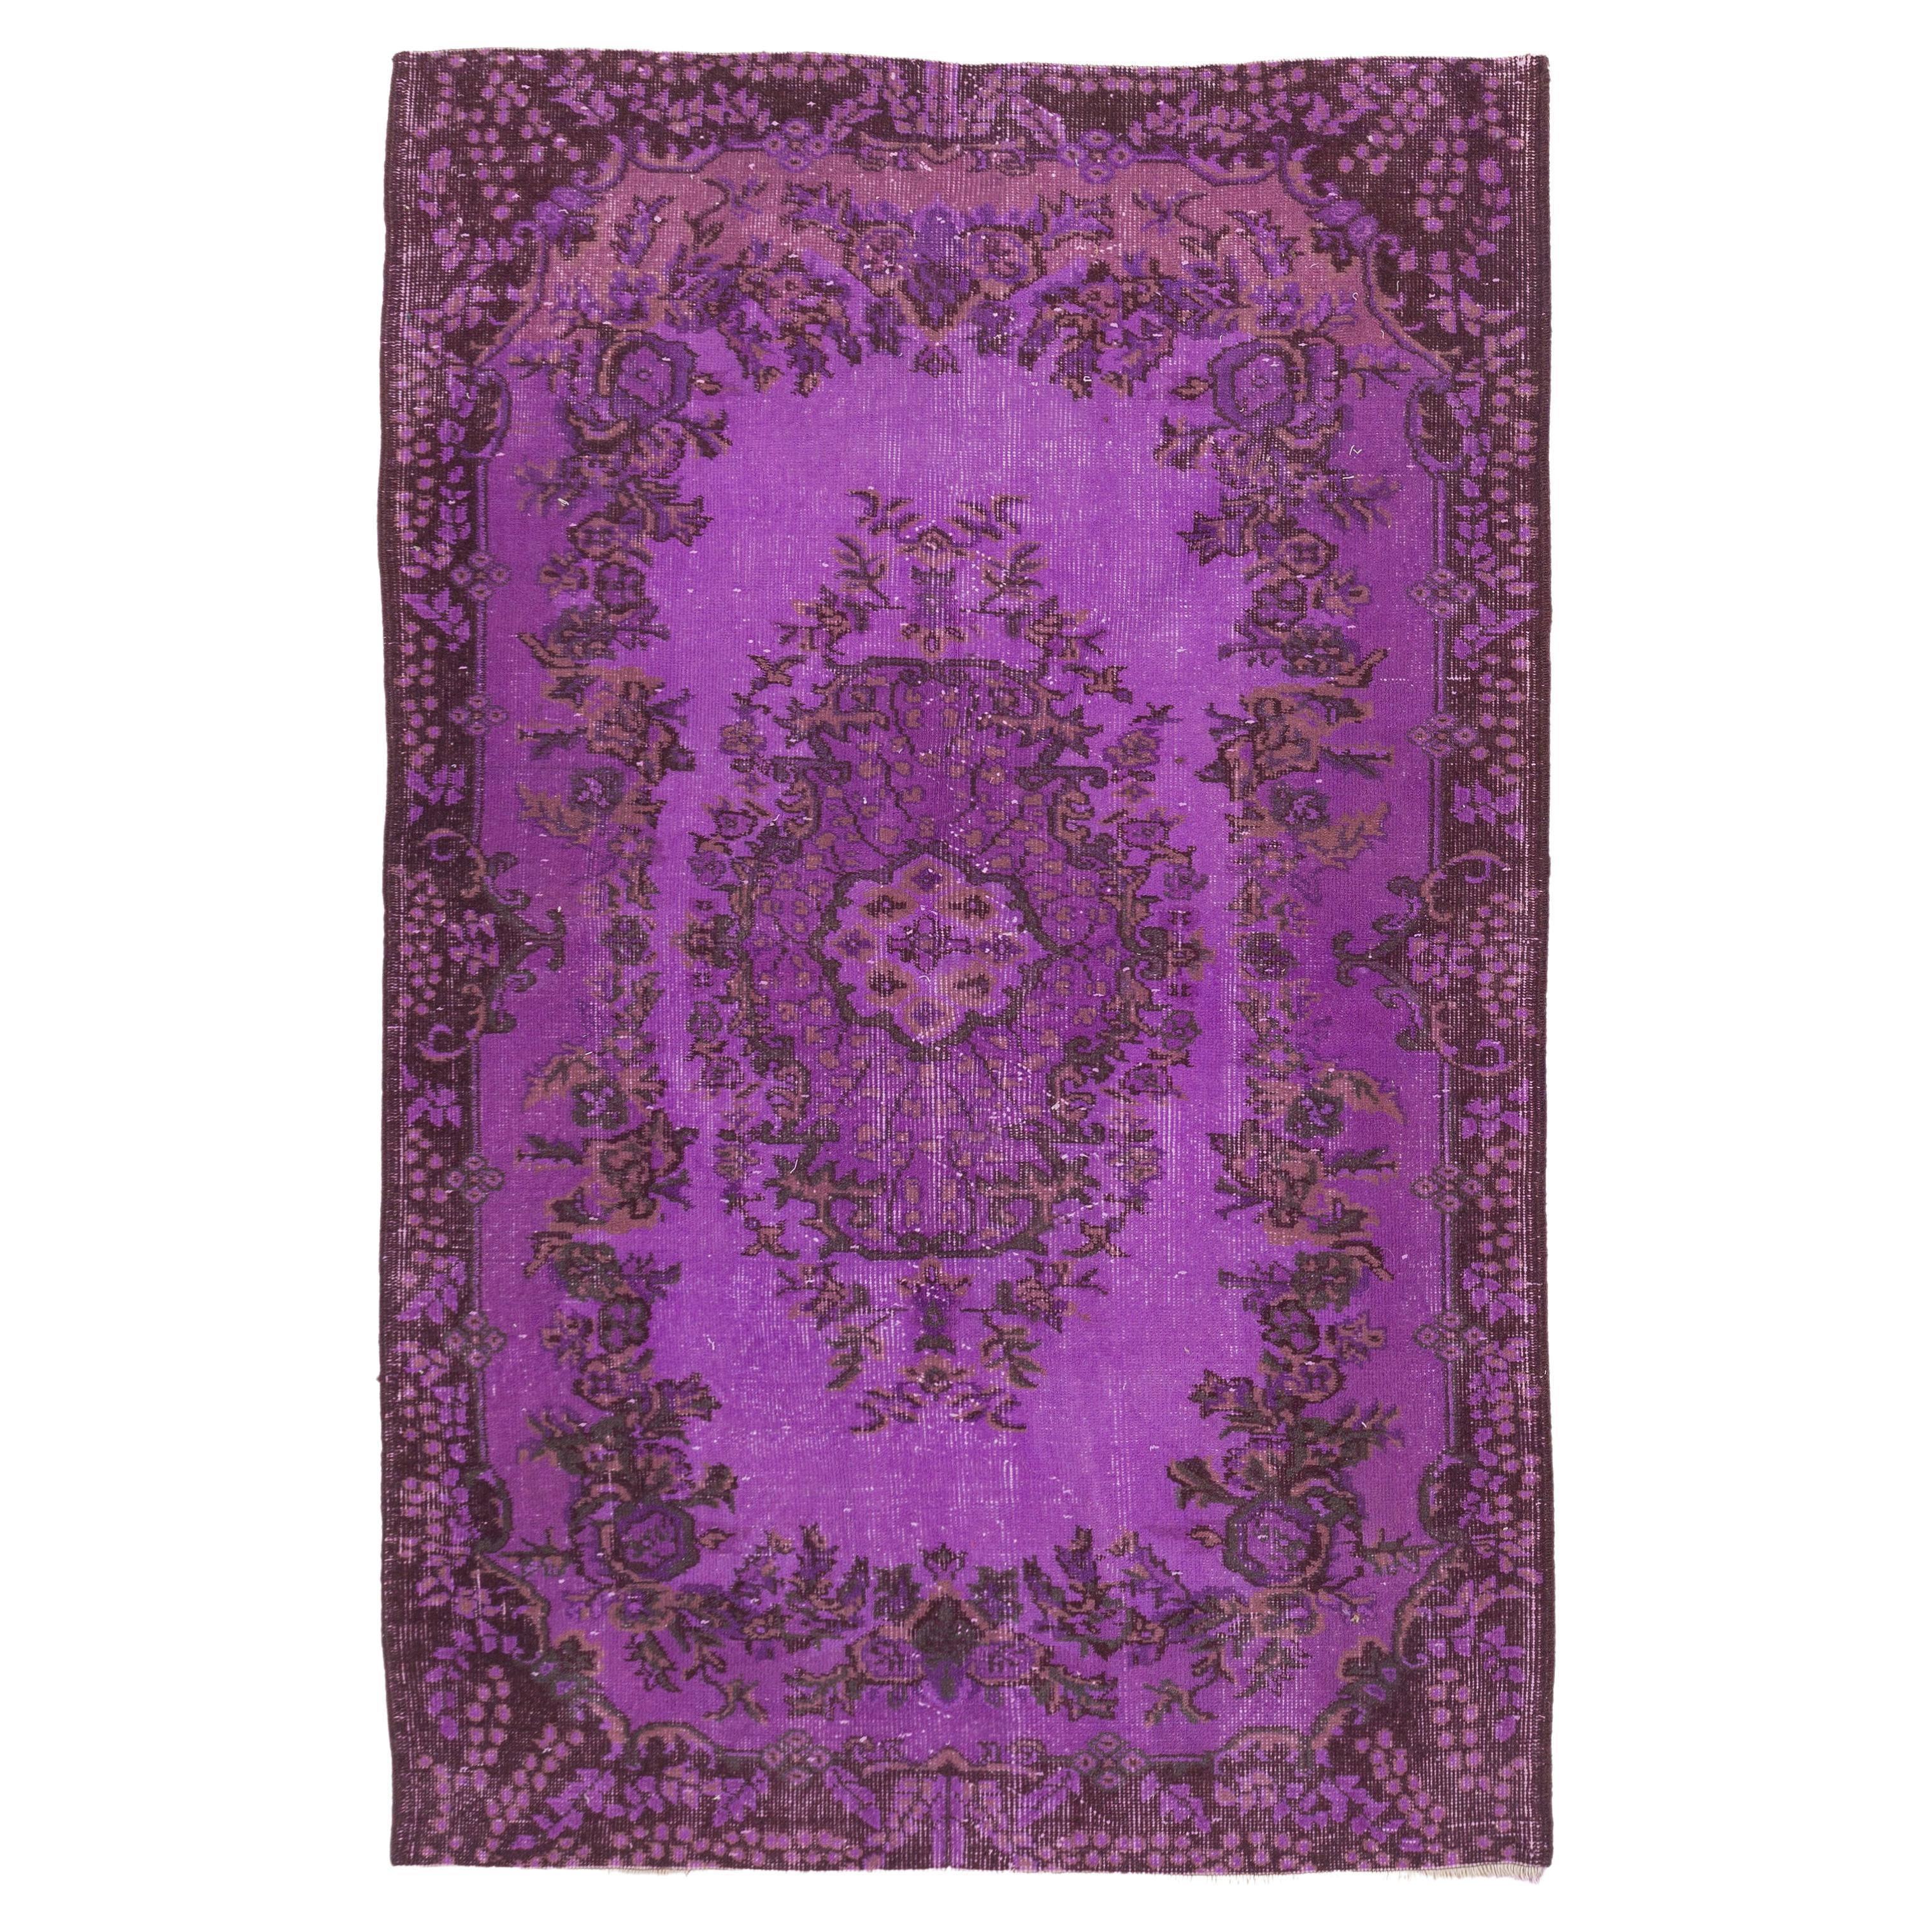 4.2x6.6 Ft Baroque Design Handmade Vintage Accent Rug Over-dyed in Purple Color